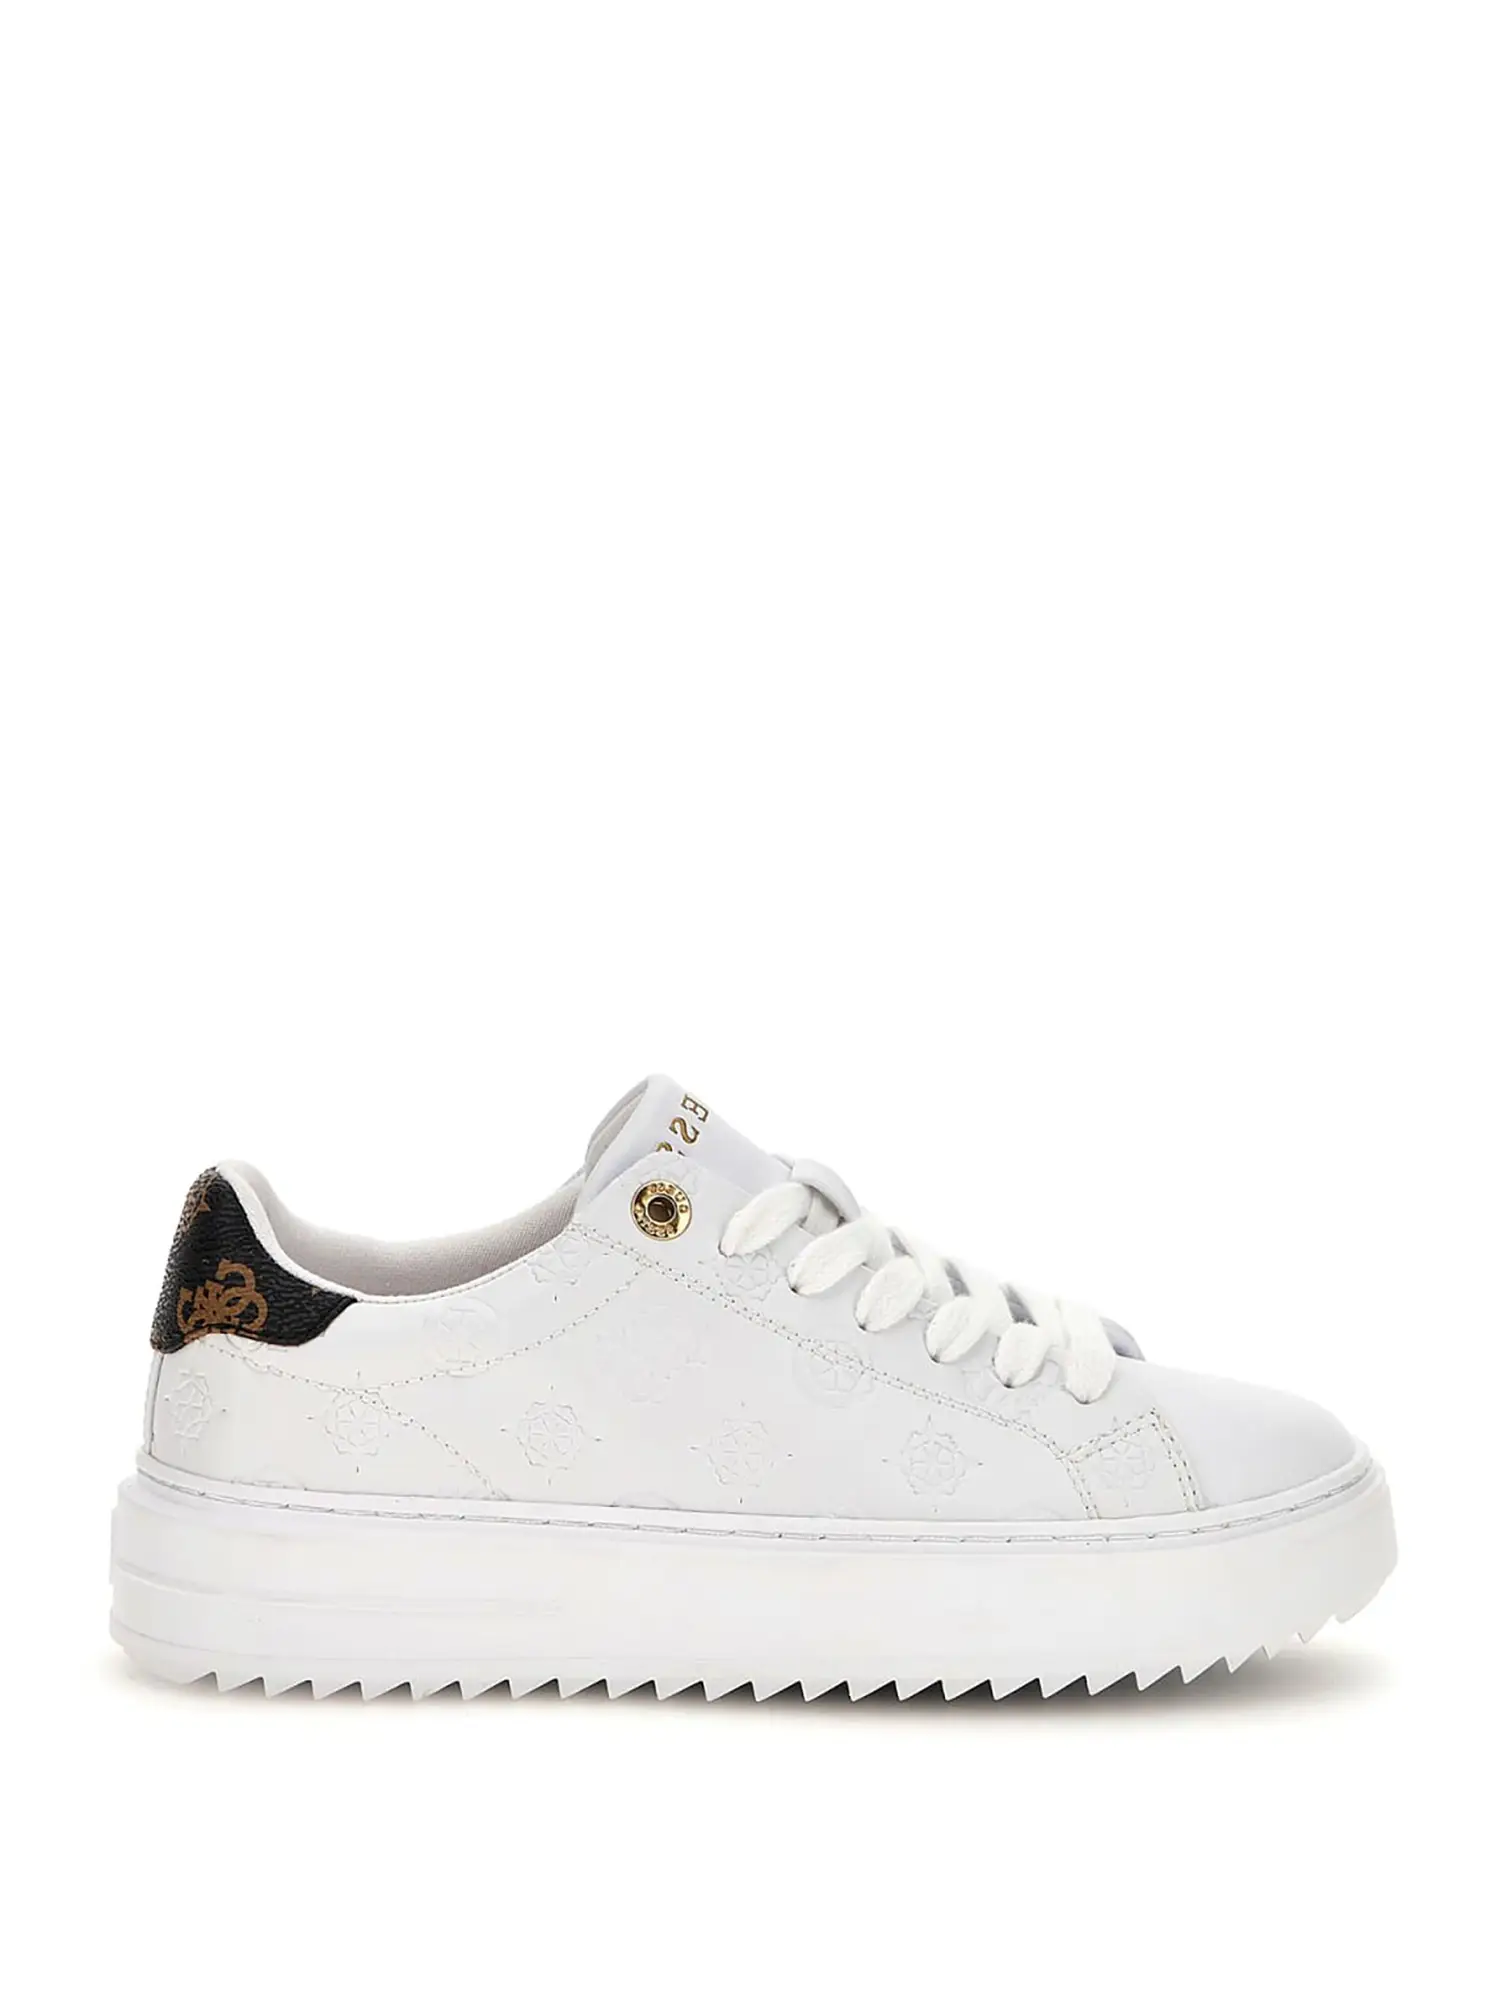 SNEAKERS DONNA - GUESS - FLPDS4 FAL12 - BIANCO, 36